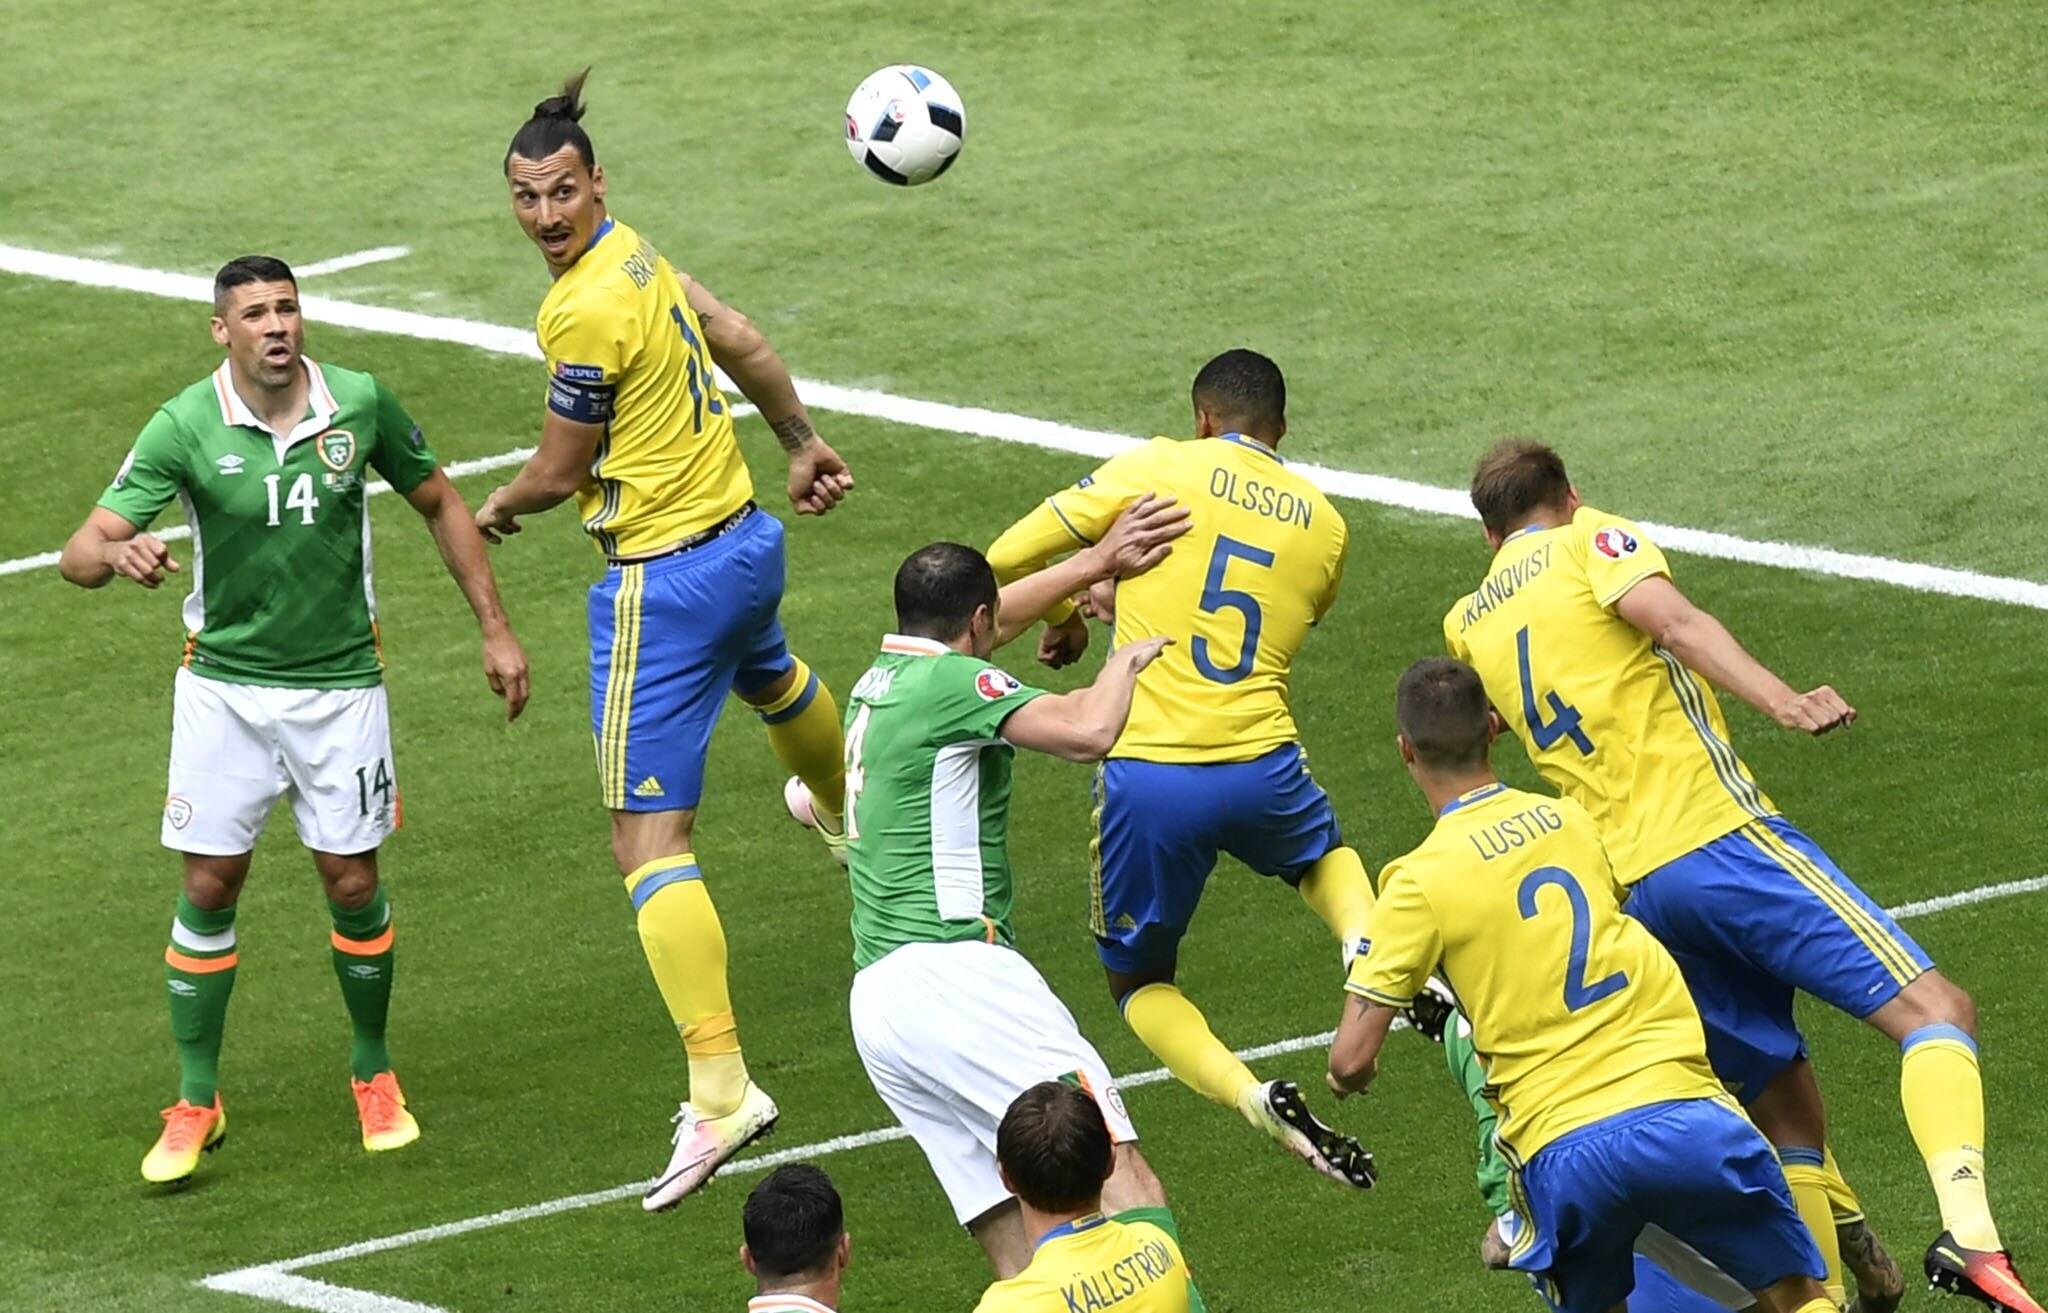  1: 1!  Ireland denied victory against Sweden in an own goal

